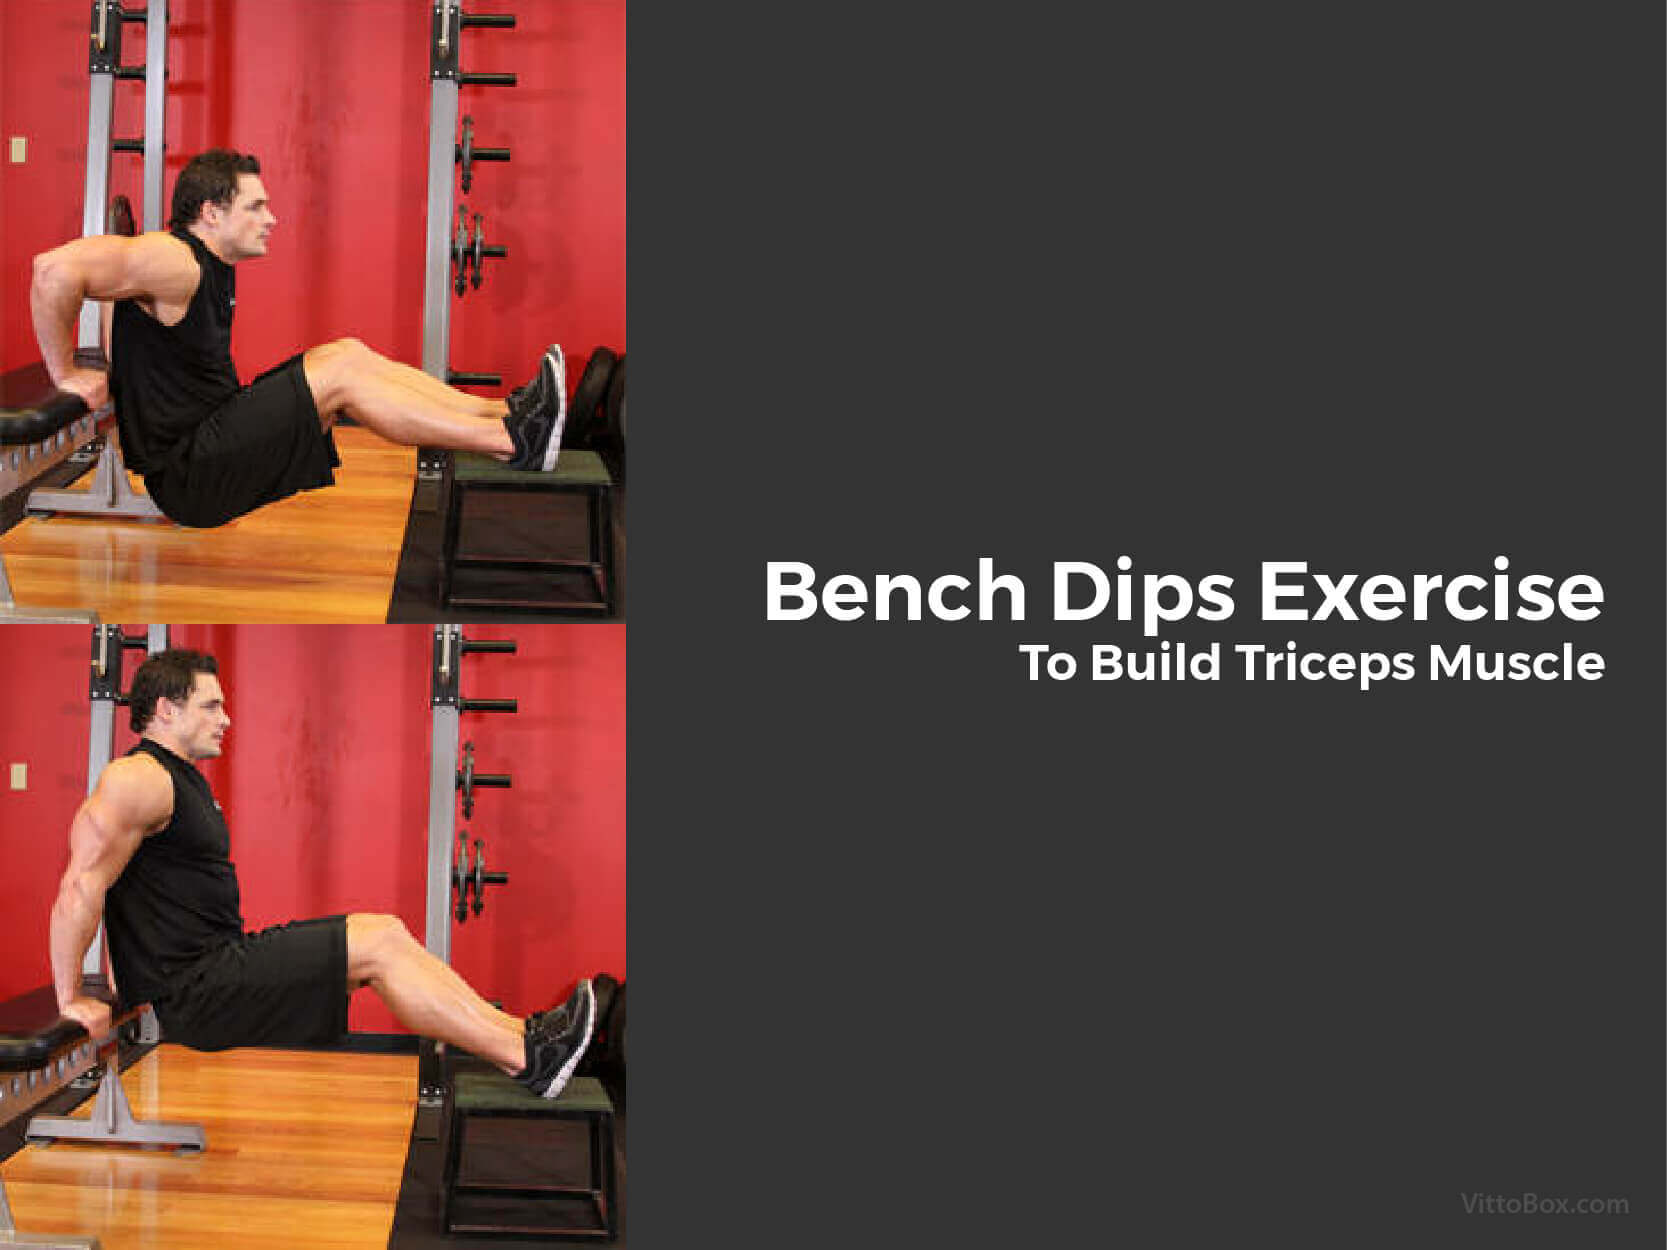 Bench Dips Exercise To Build Triceps Muscle